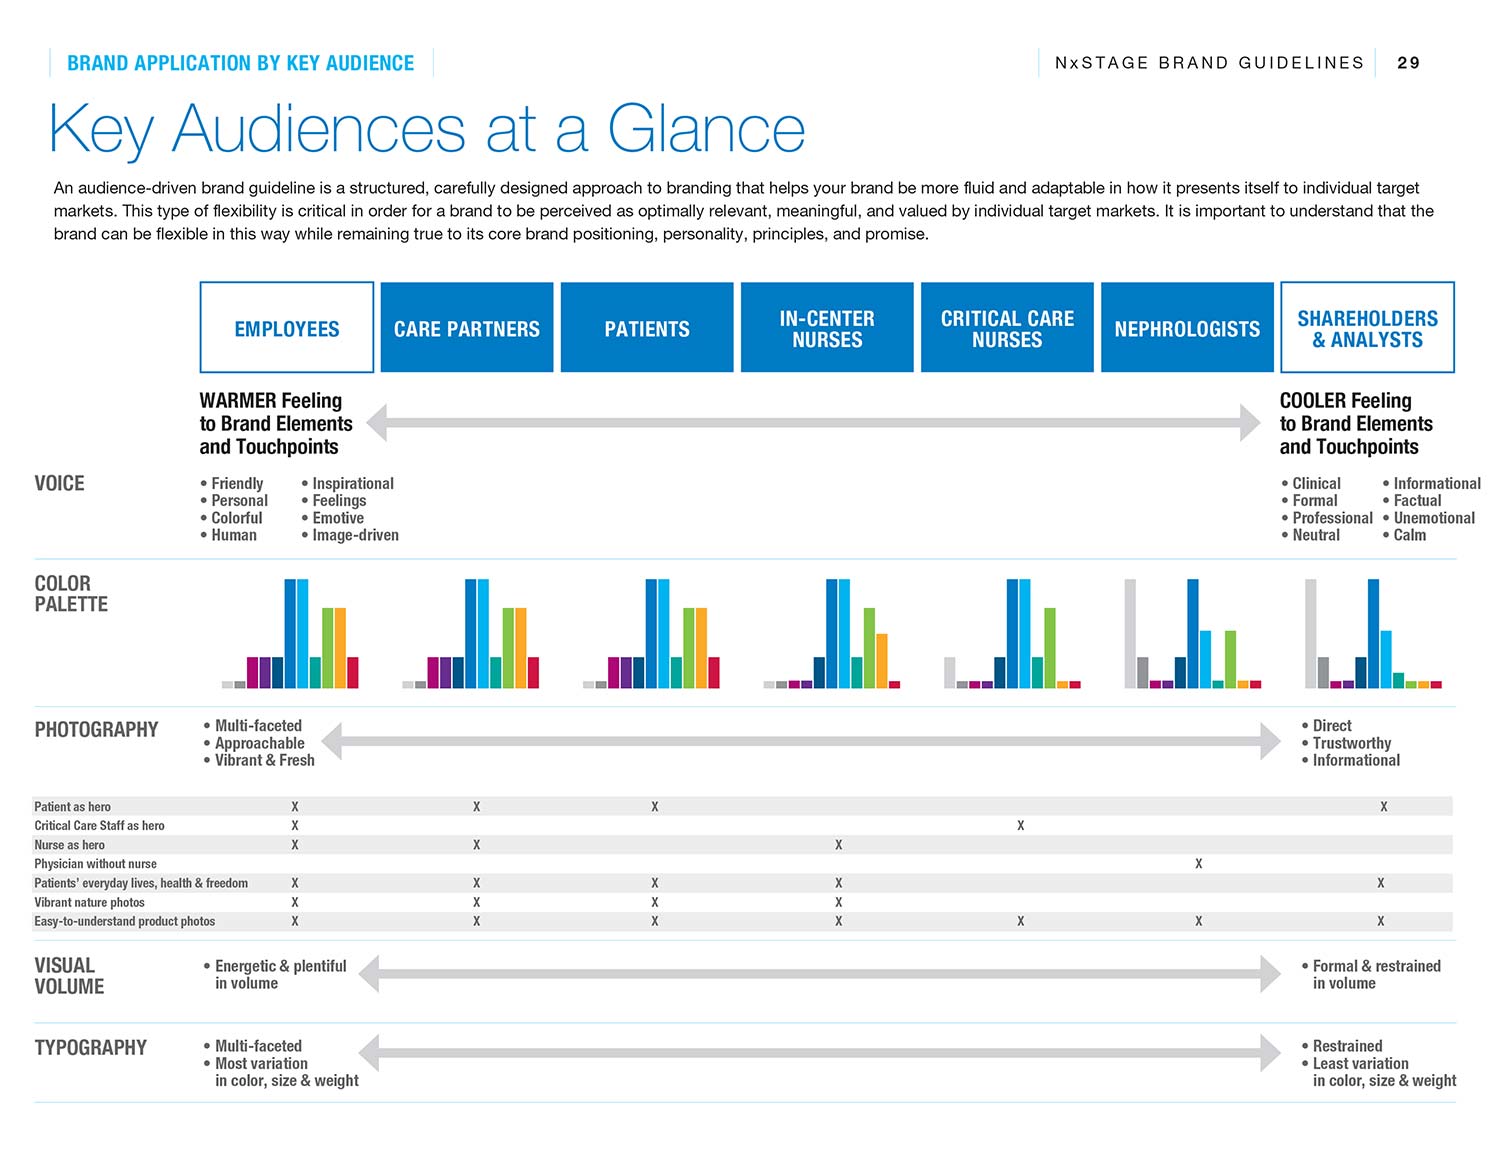 NxStage Brand Guide Audiences at a Glance